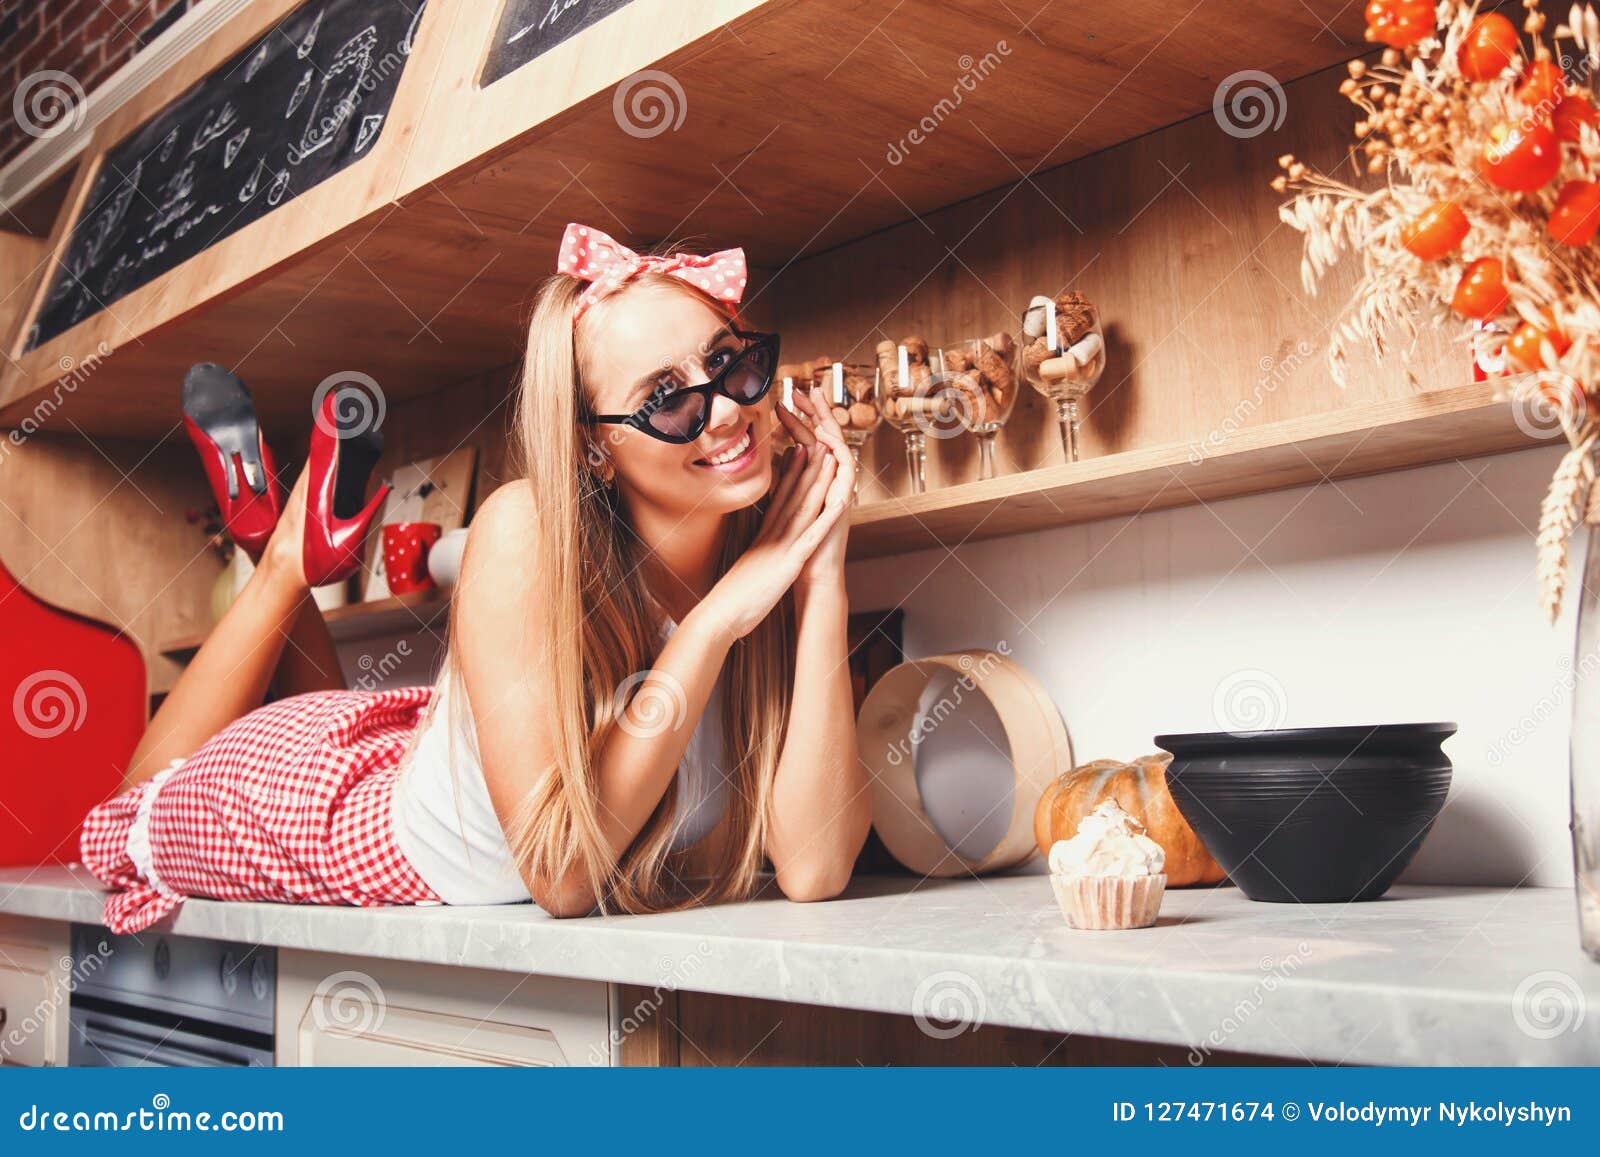 woman take a rest on the kitchen